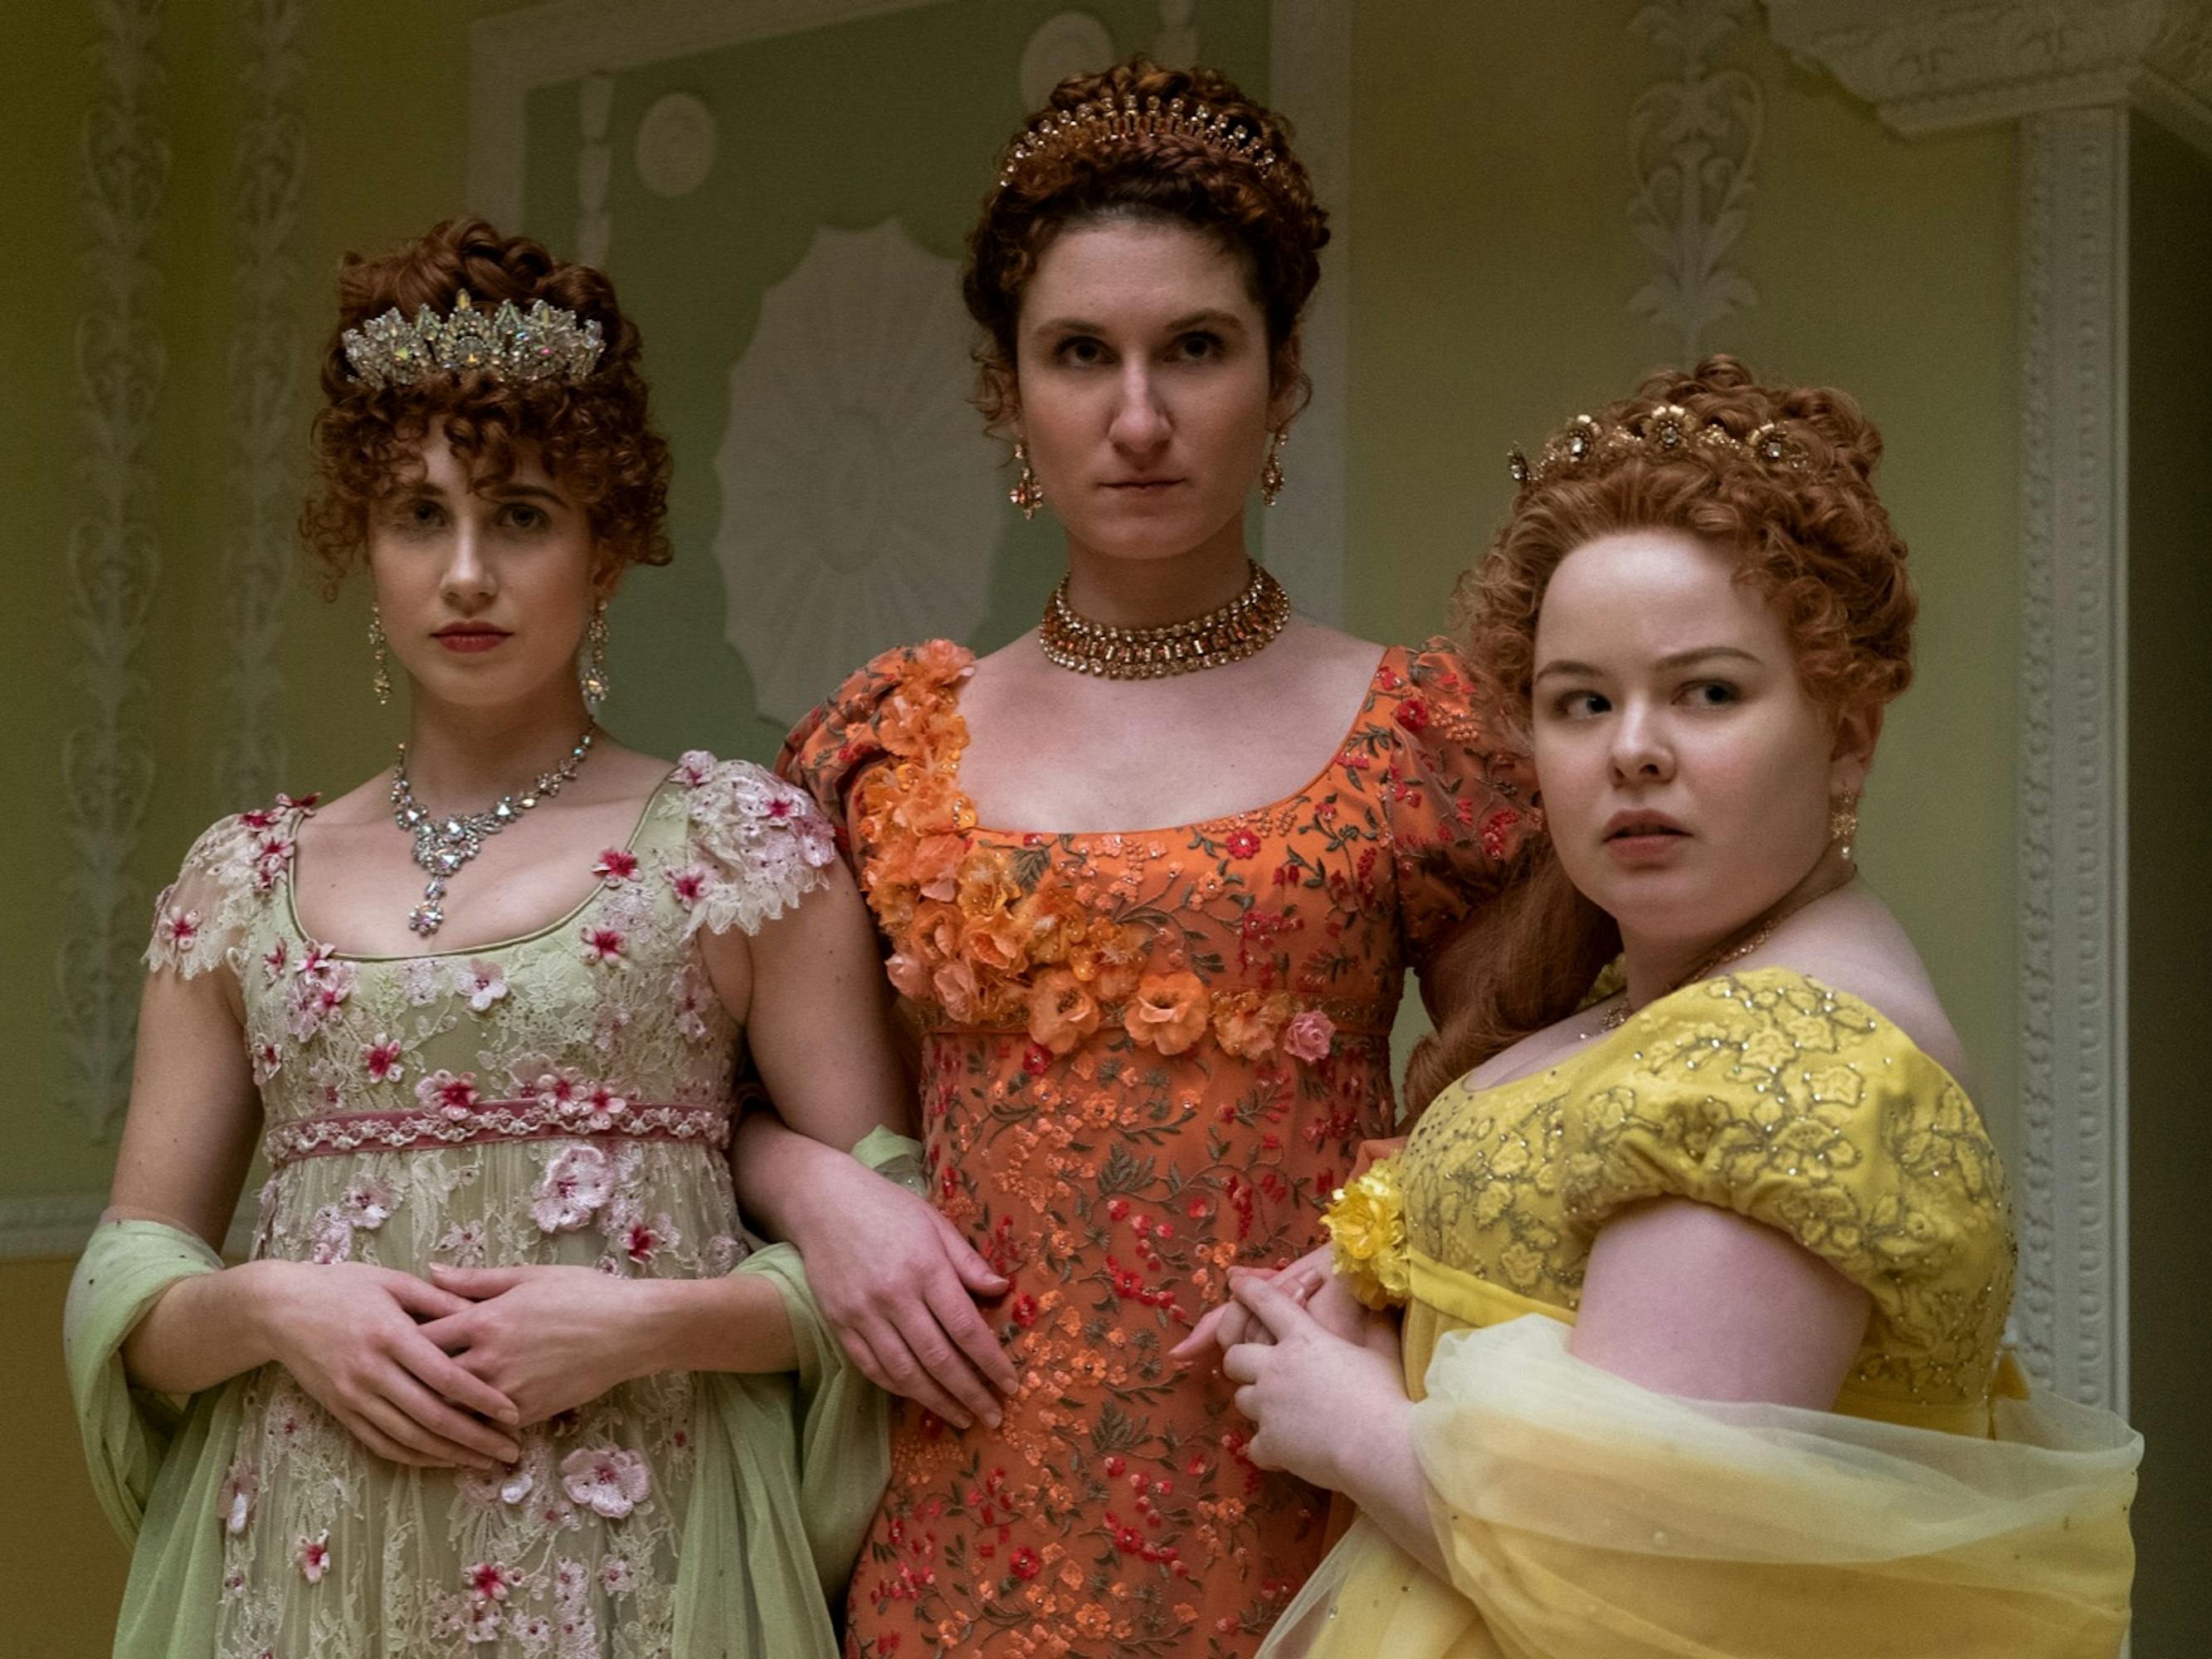 Penelope Featherington (Nicola Coughlan) stands beside her sisters. Coughlan wears a yellow gown, while one sister wears orange and the other green with pink flowers. They look judgemental and intimidating with their arms linked together.